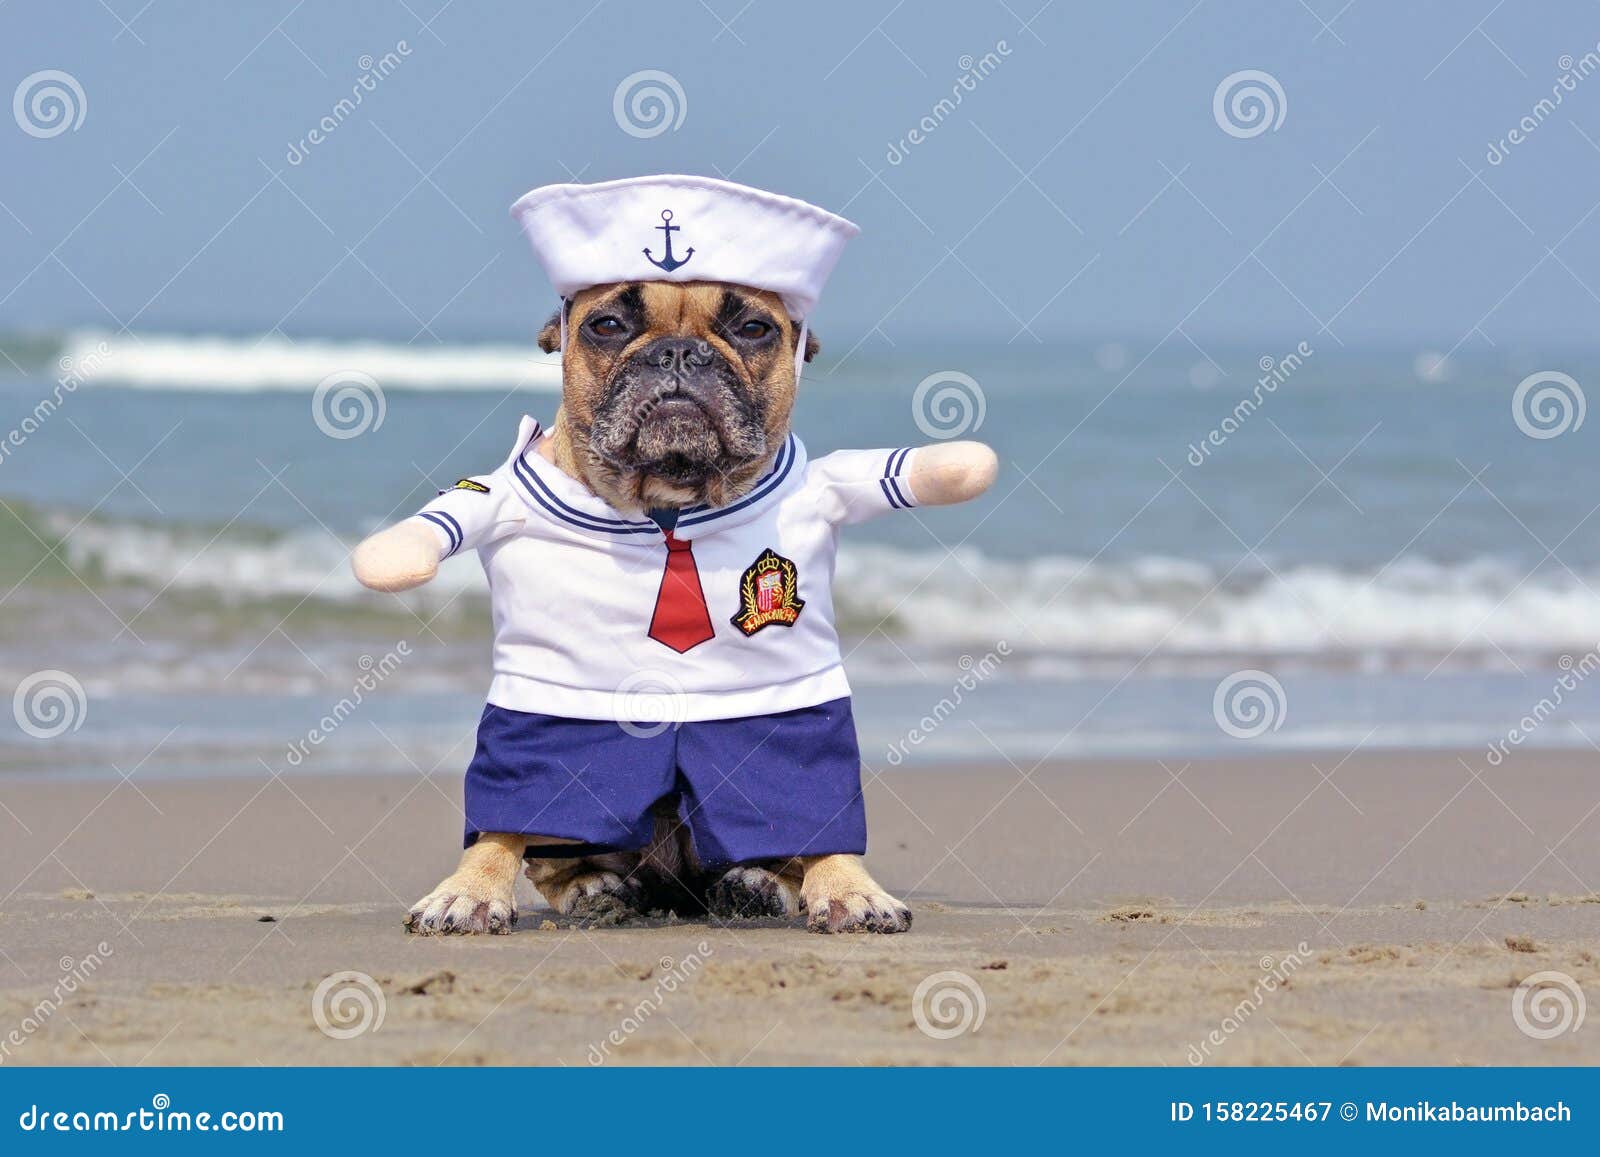 funny french bulldog dressed up with cute sailor dog halloween costume on beach with ocean in background